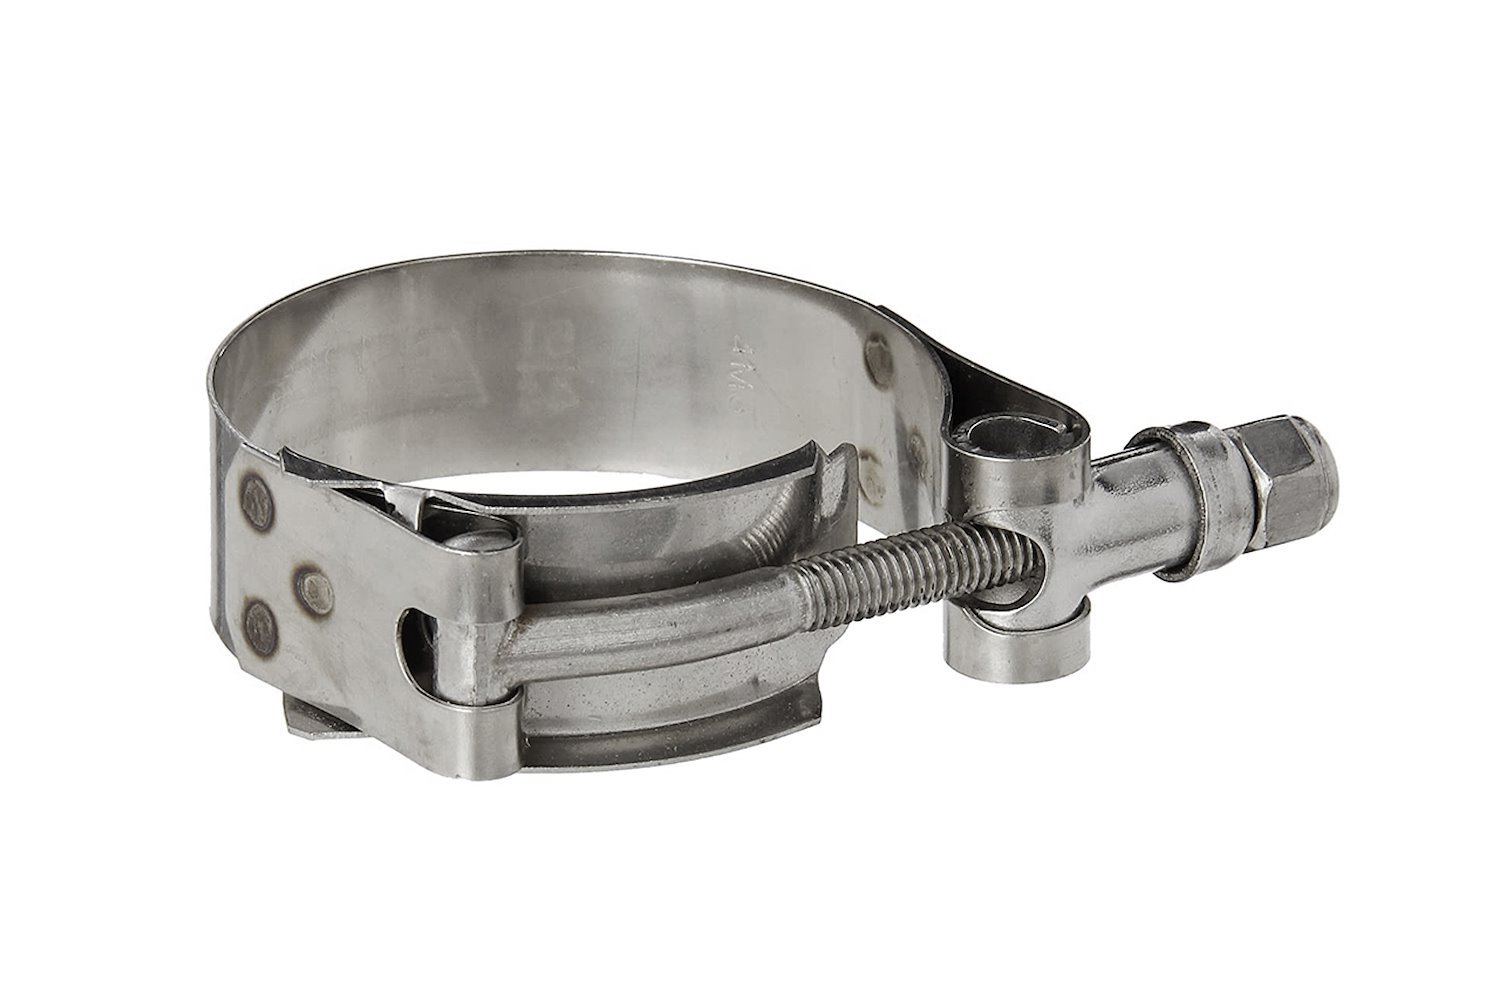 316-SSTC-35-40 100-Percent Marine Grade Stainless Steel T-Bolt Hose Clamp, Size Range: 1.38 in.- 1.57 in.